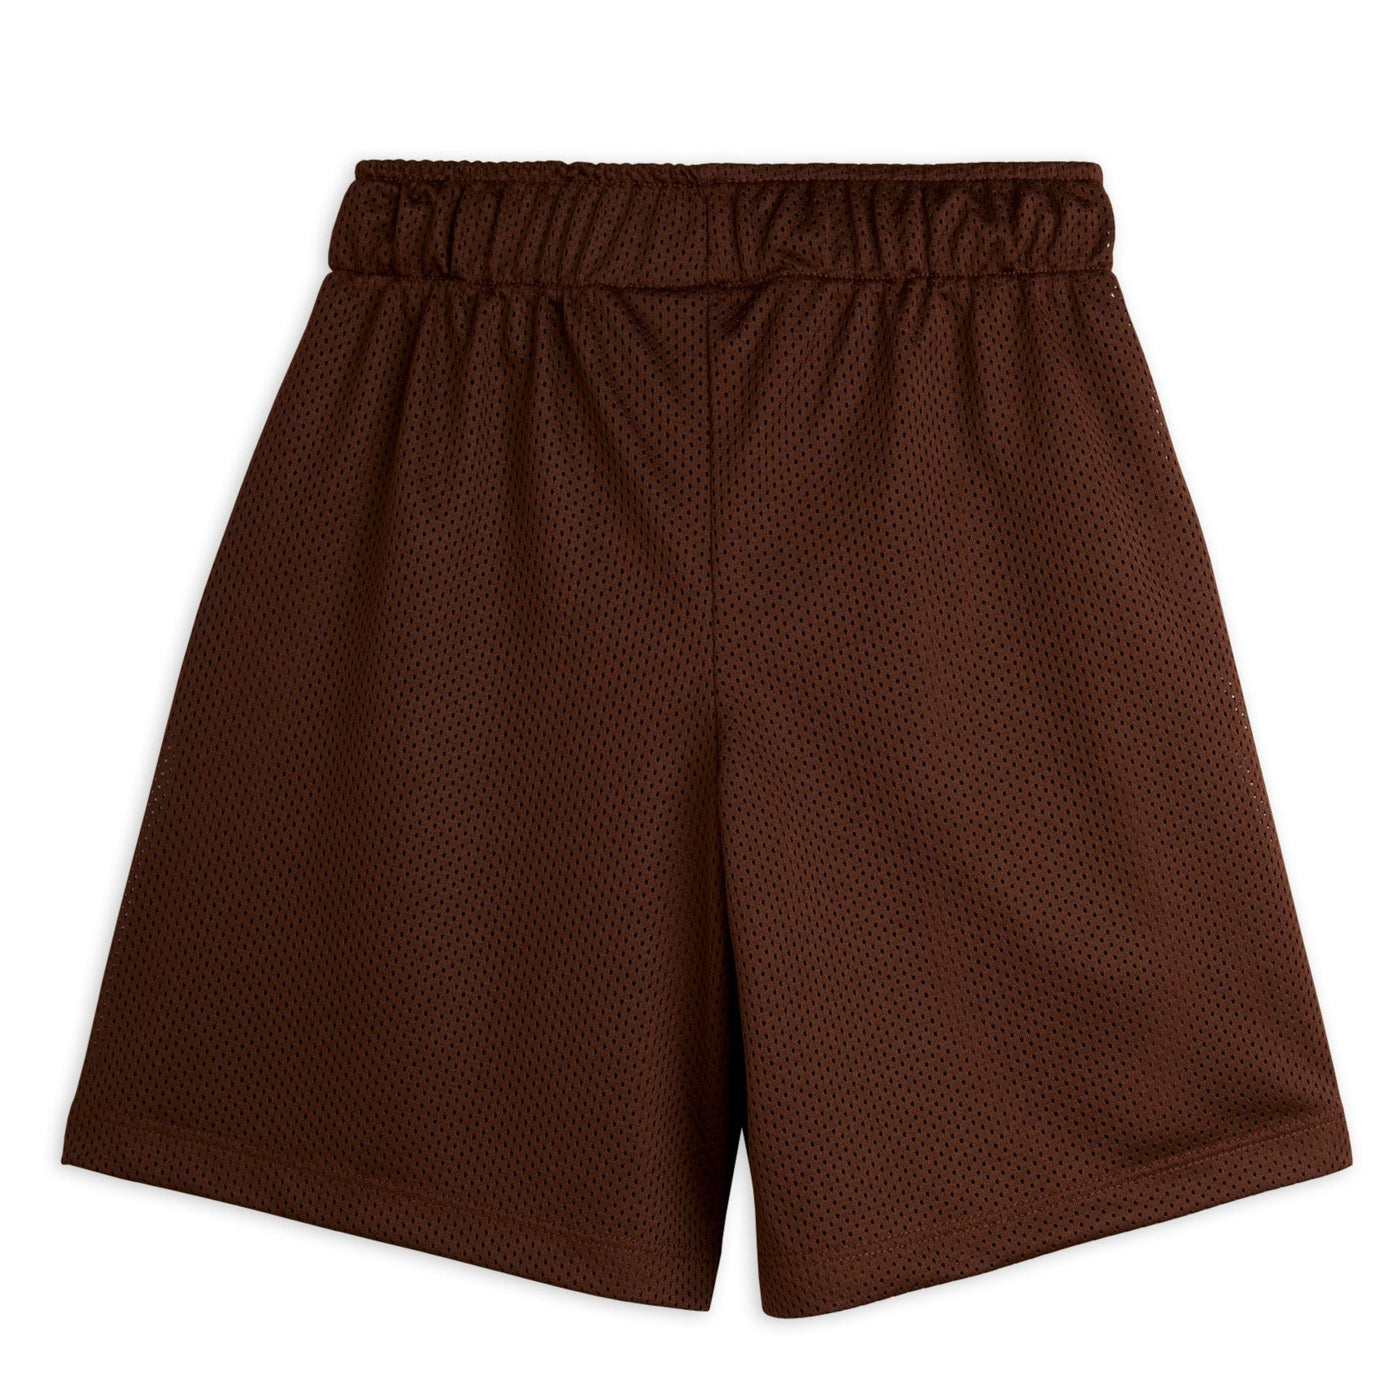 Basketball Mesh Shorts in Brown by Mini Rodini - Petite Belle